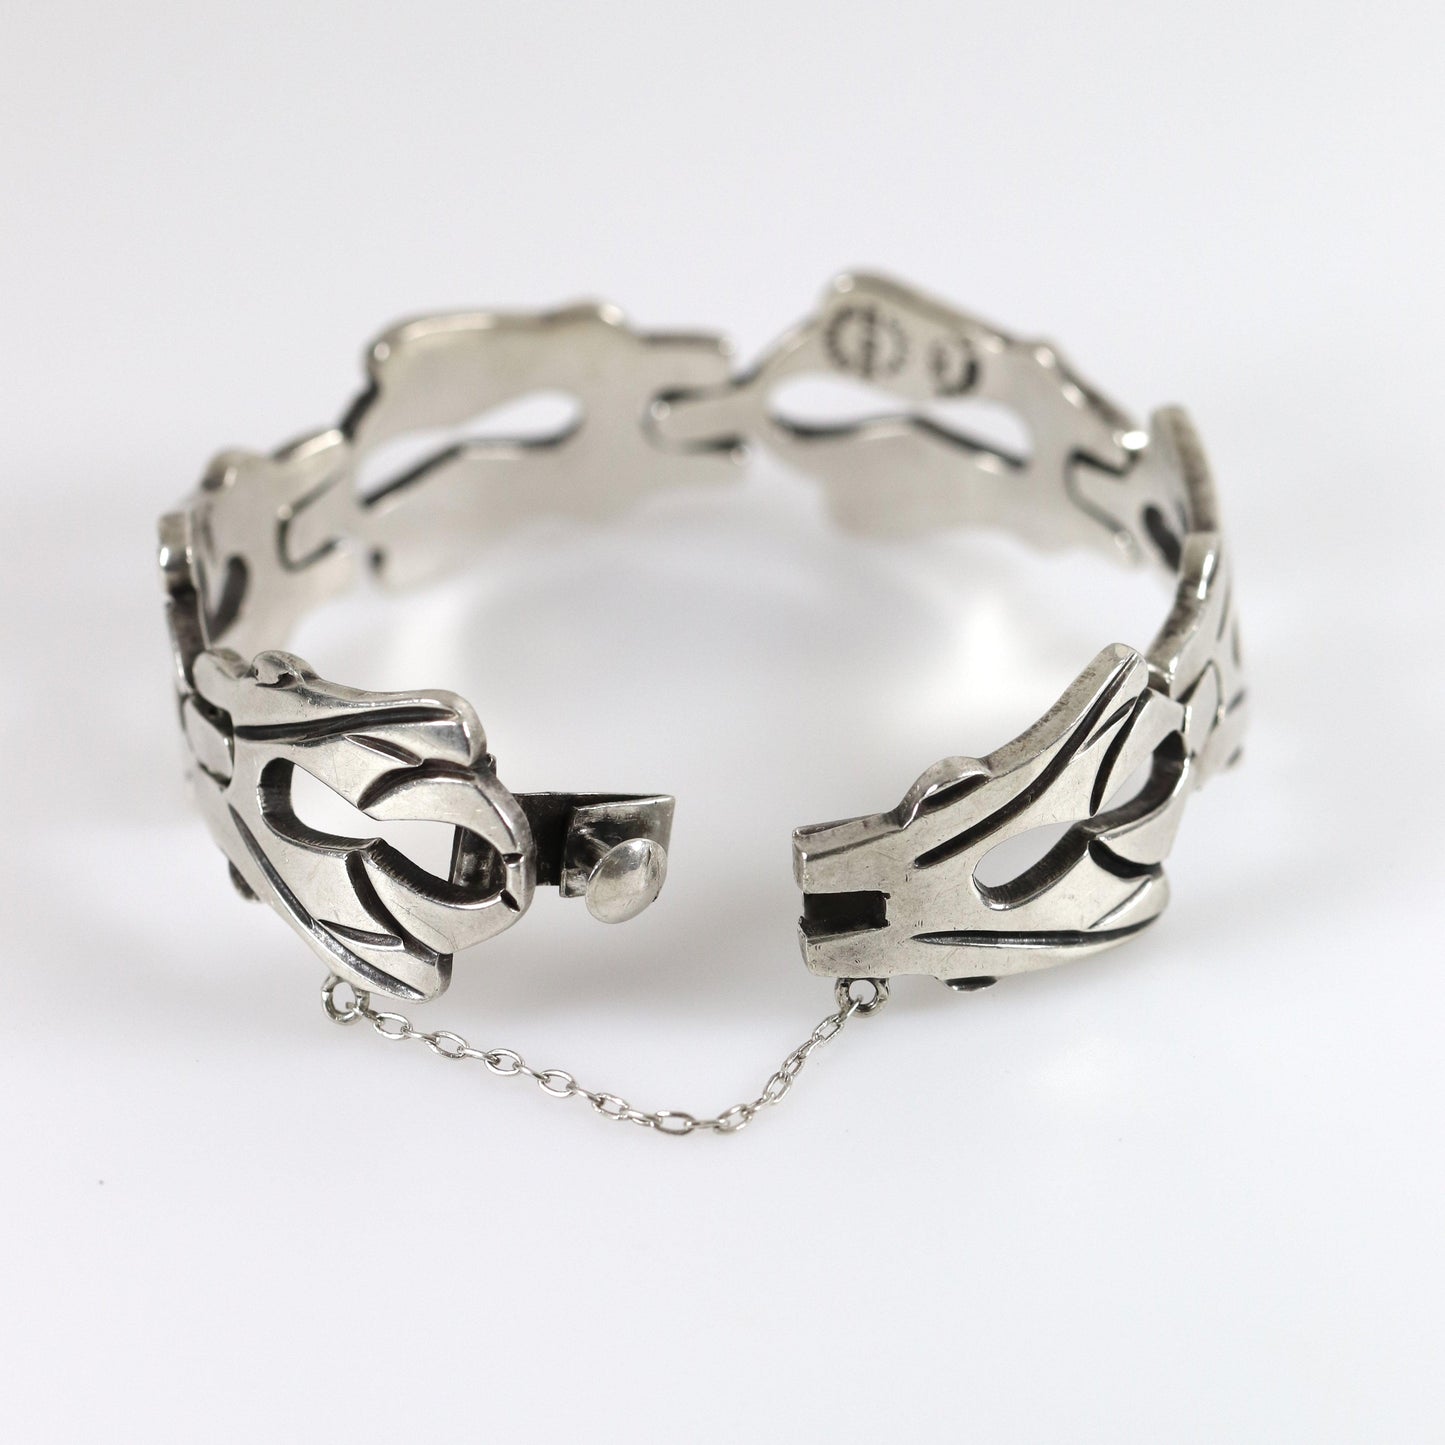 Vintage Taxco Silver Mexican Jewelry | Solid Mid-Century Panel Bracelet - Carmel Fine Silver Jewelry